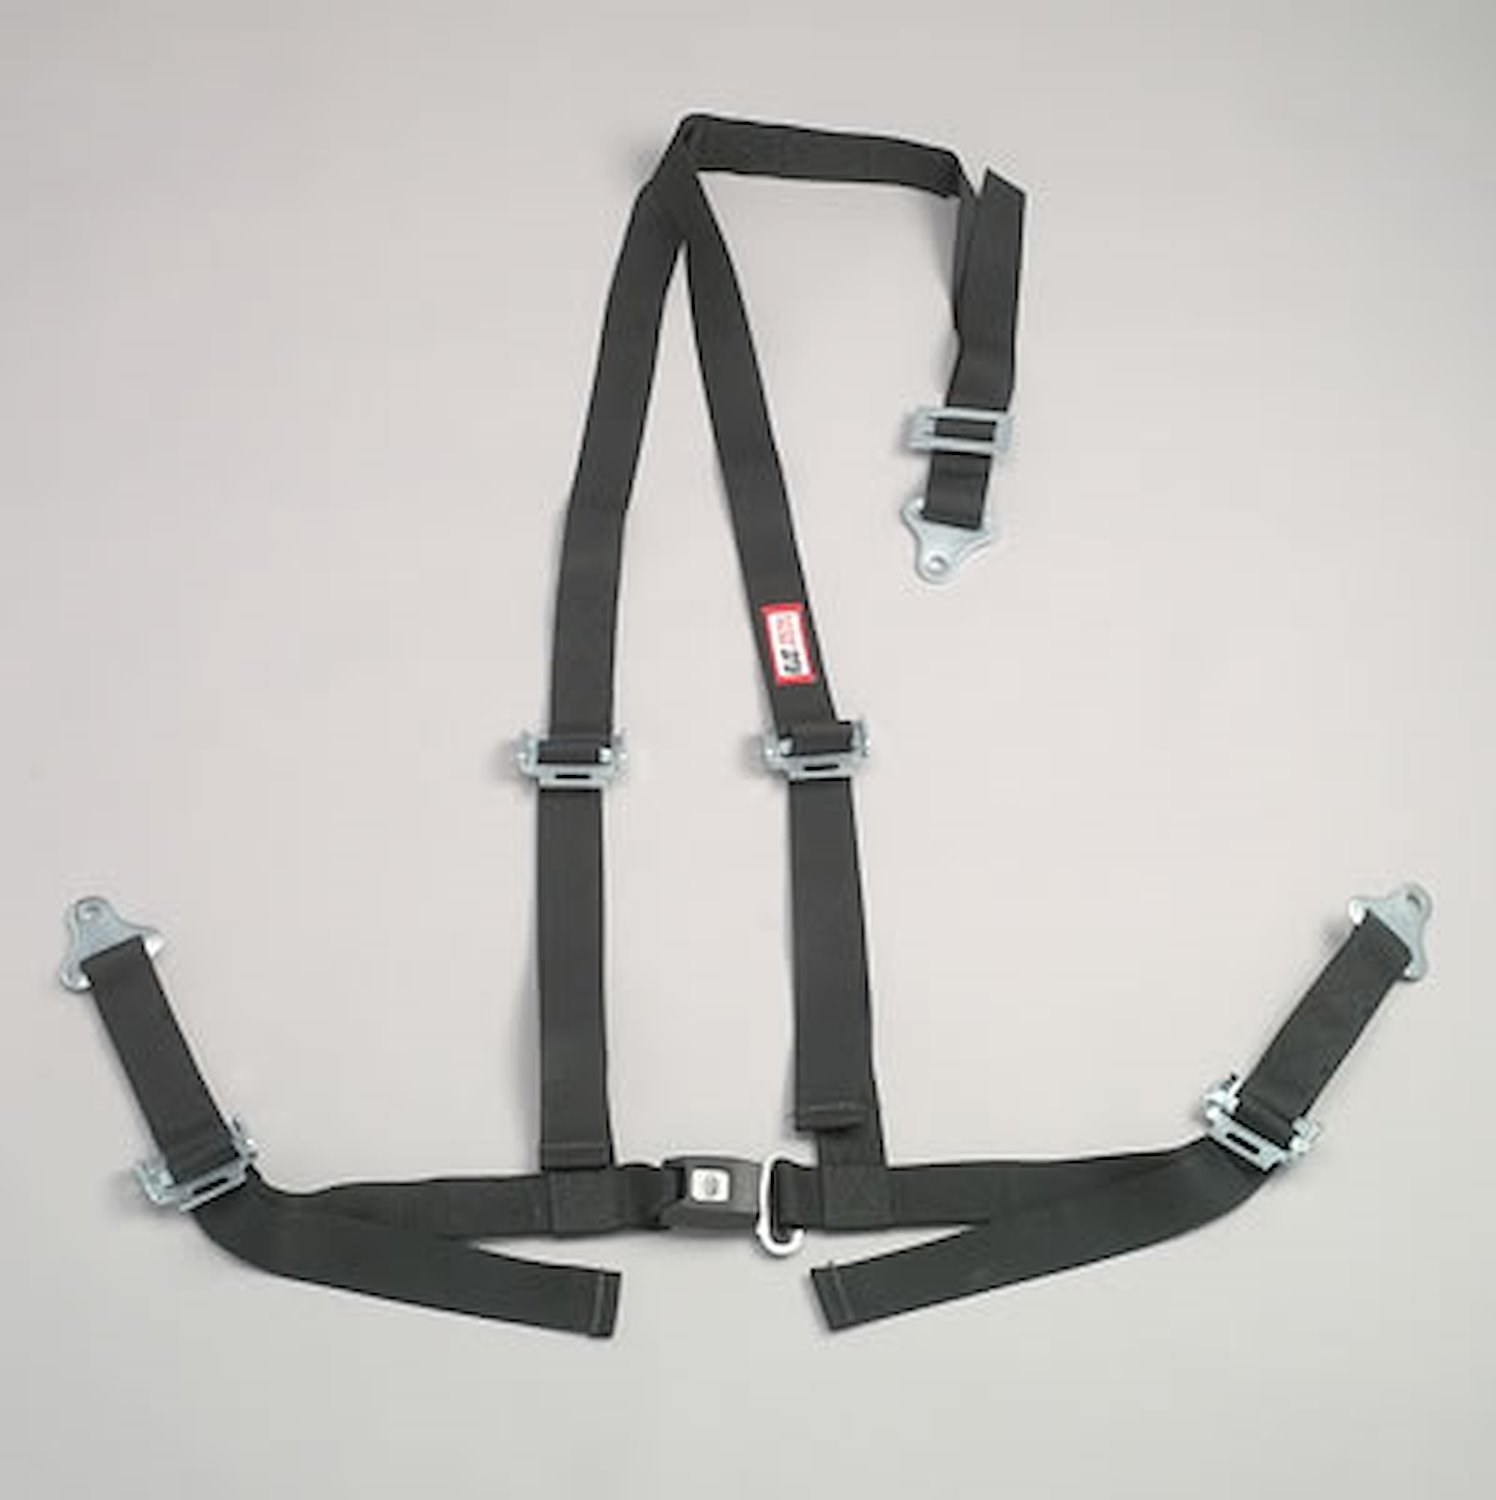 NON-SFI B&T HARNESS 2 PULL DOWN Lap Belt 2 S. H. Individual FLOOR Mount ALL WRAP ENDS w/STERNUM STRAP RED